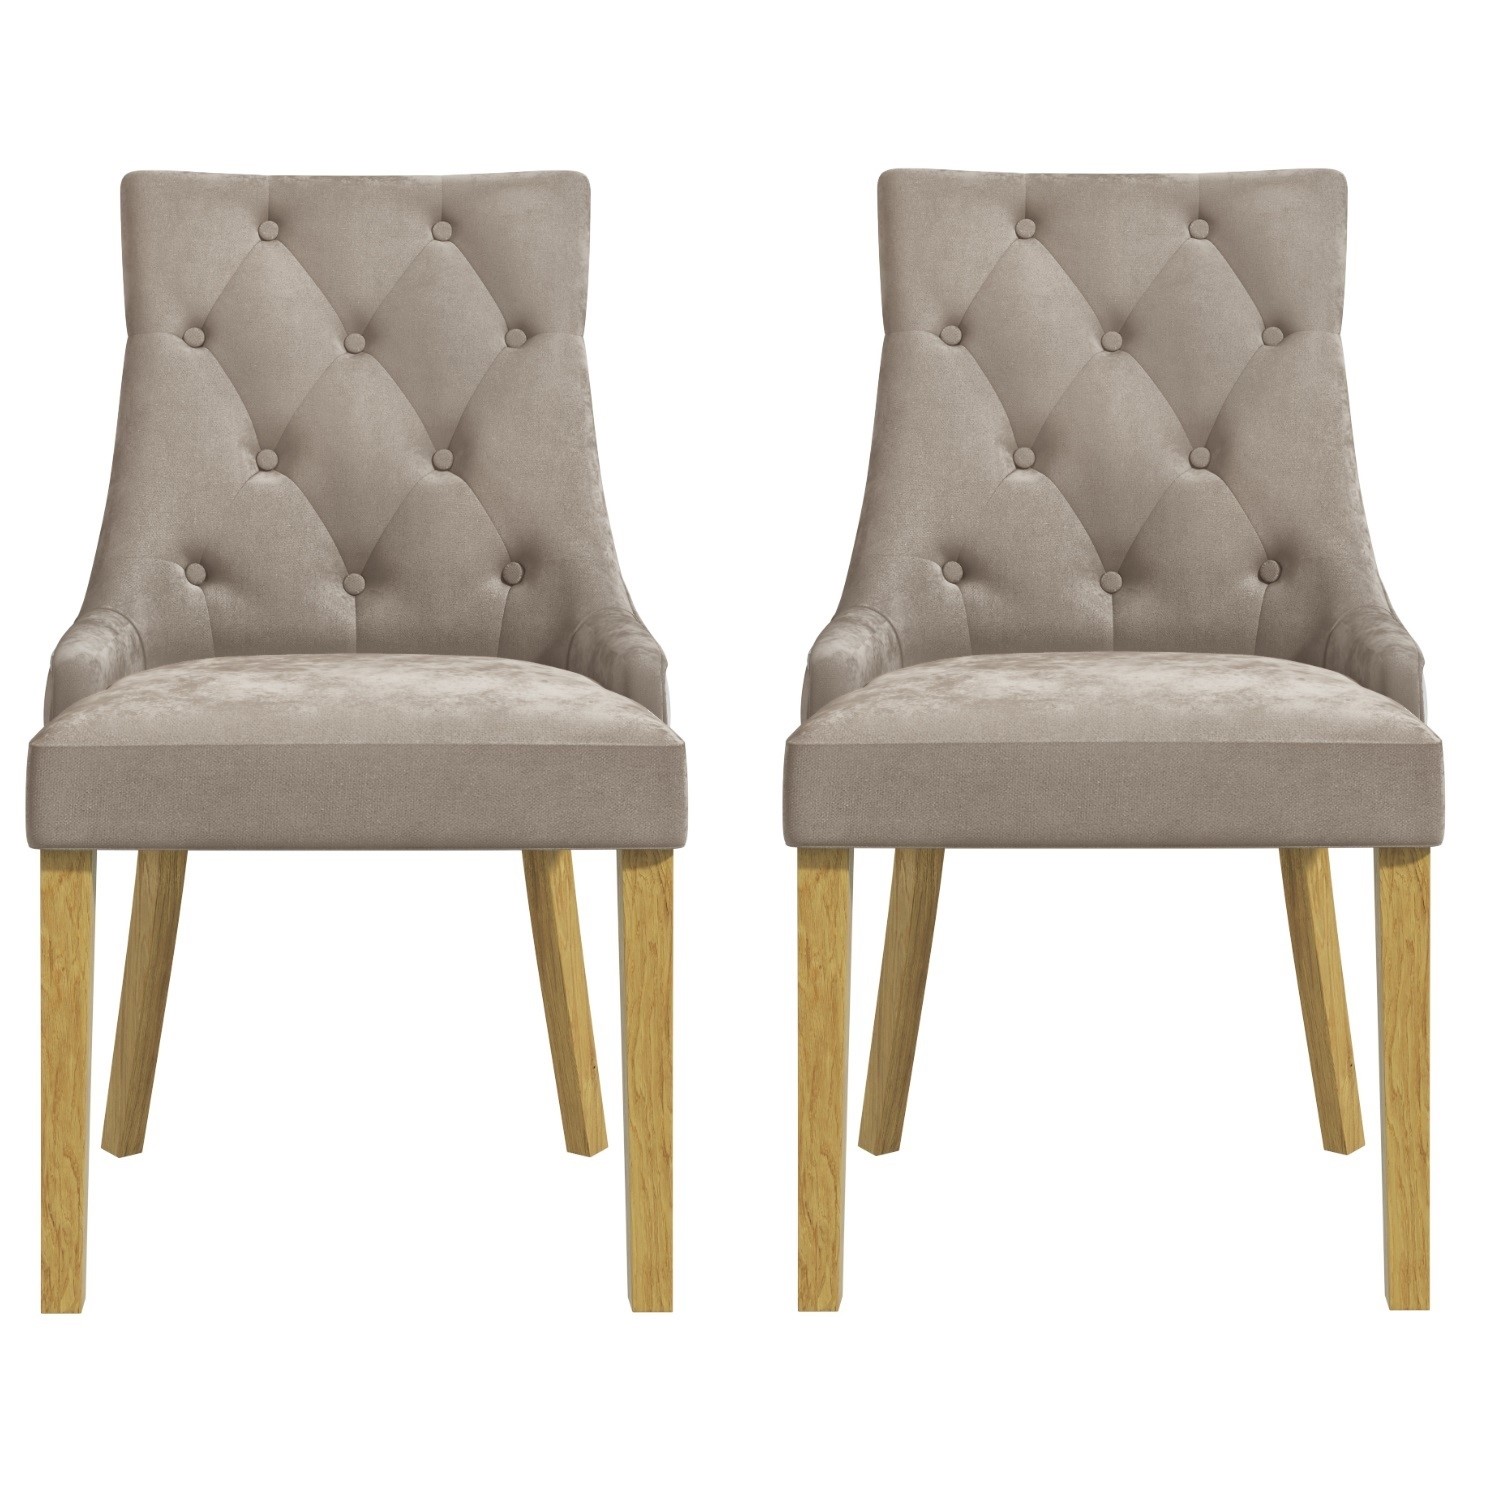 Kaylee Mink Velvet Dining Chairs With, Grey Leather Dining Room Chairs With Oak Legs